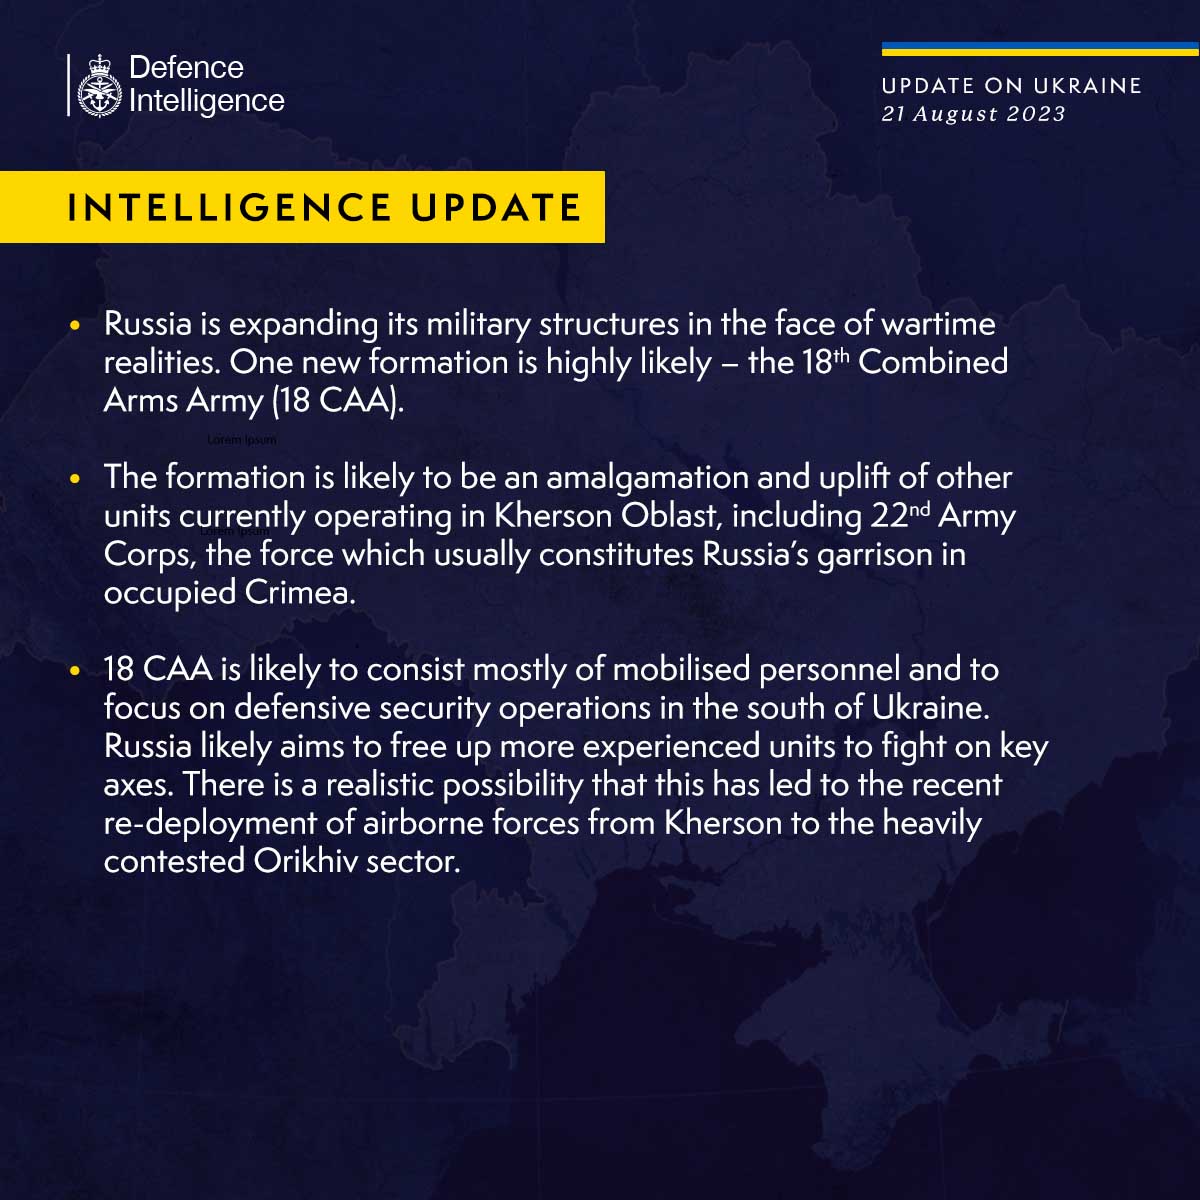 Latest Defence Intelligence update on the situation in Ukraine – 21 August 2023 Find out more about Defence Intelligence's use of language: ow.ly/R1ST50PBibf 🇺🇦 #StandWithUkraine 🇺🇦